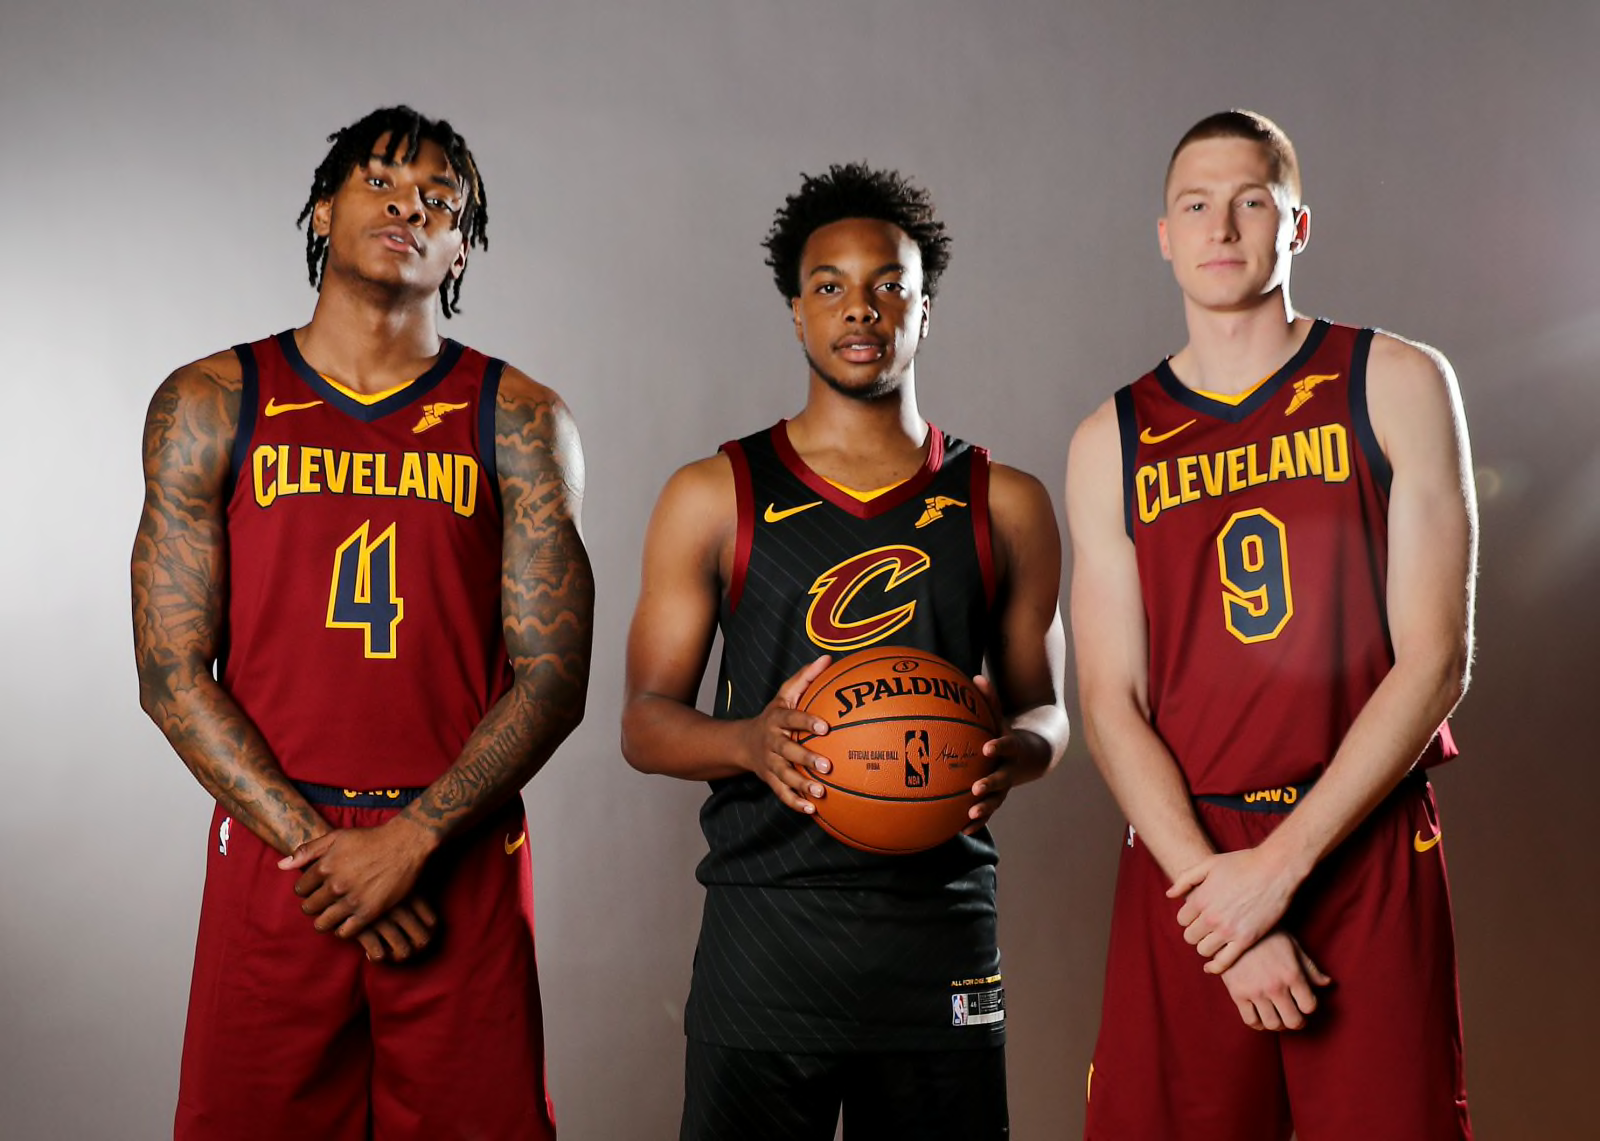 Cleveland Cavaliers: 2021, 2022 drafts could turn CLE into one of better up-and-coming teams